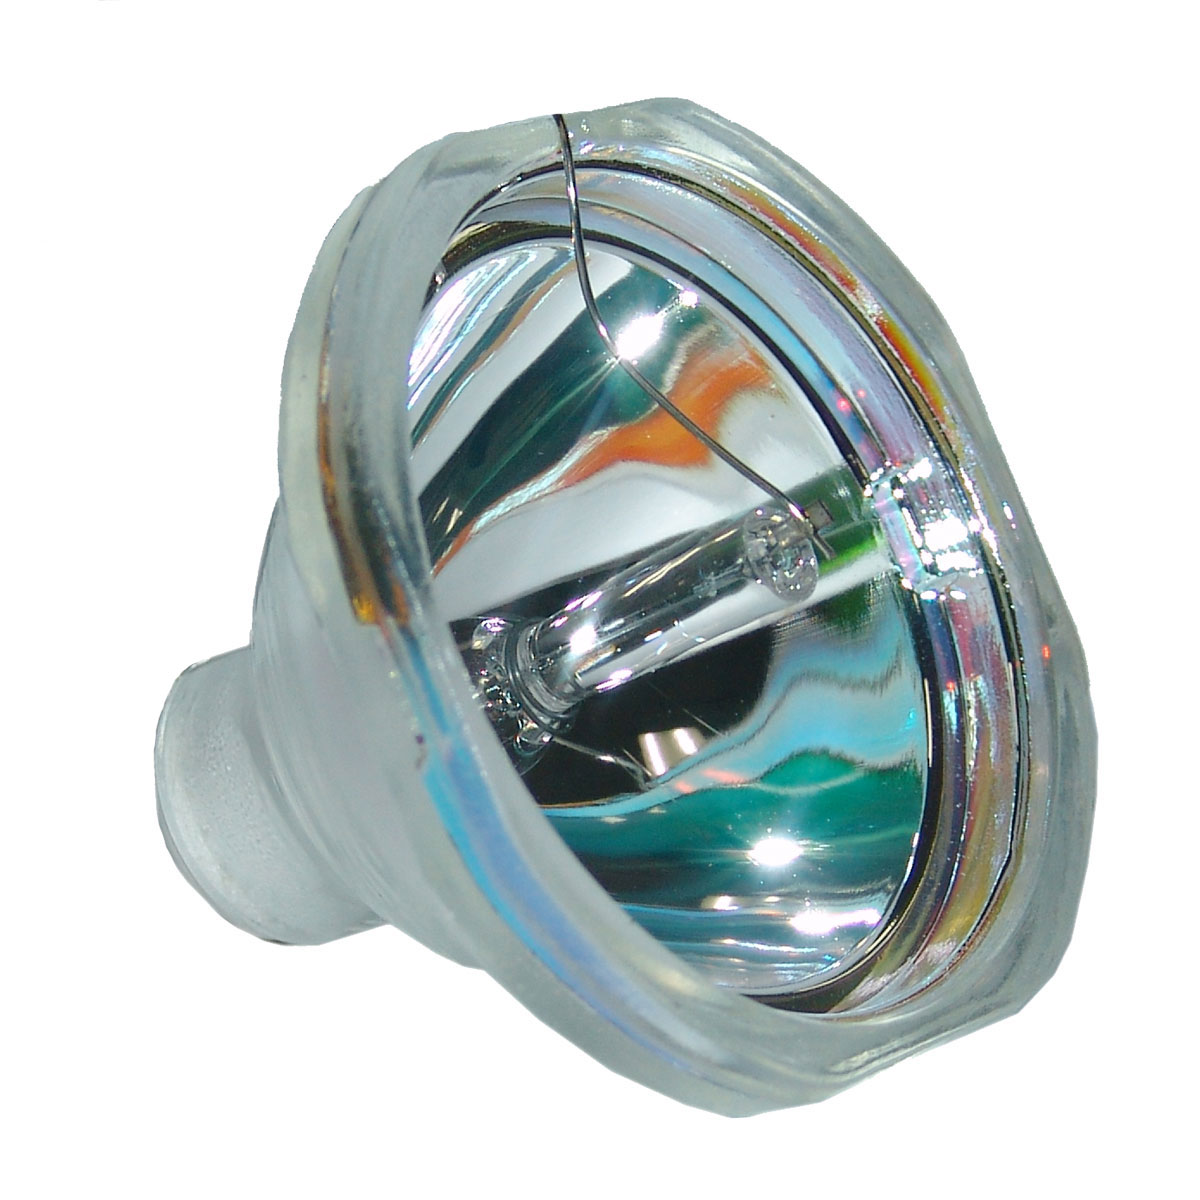 Lutema Economy for Hitachi DT00621 Projector Lamp (Bulb Only) - image 2 of 6